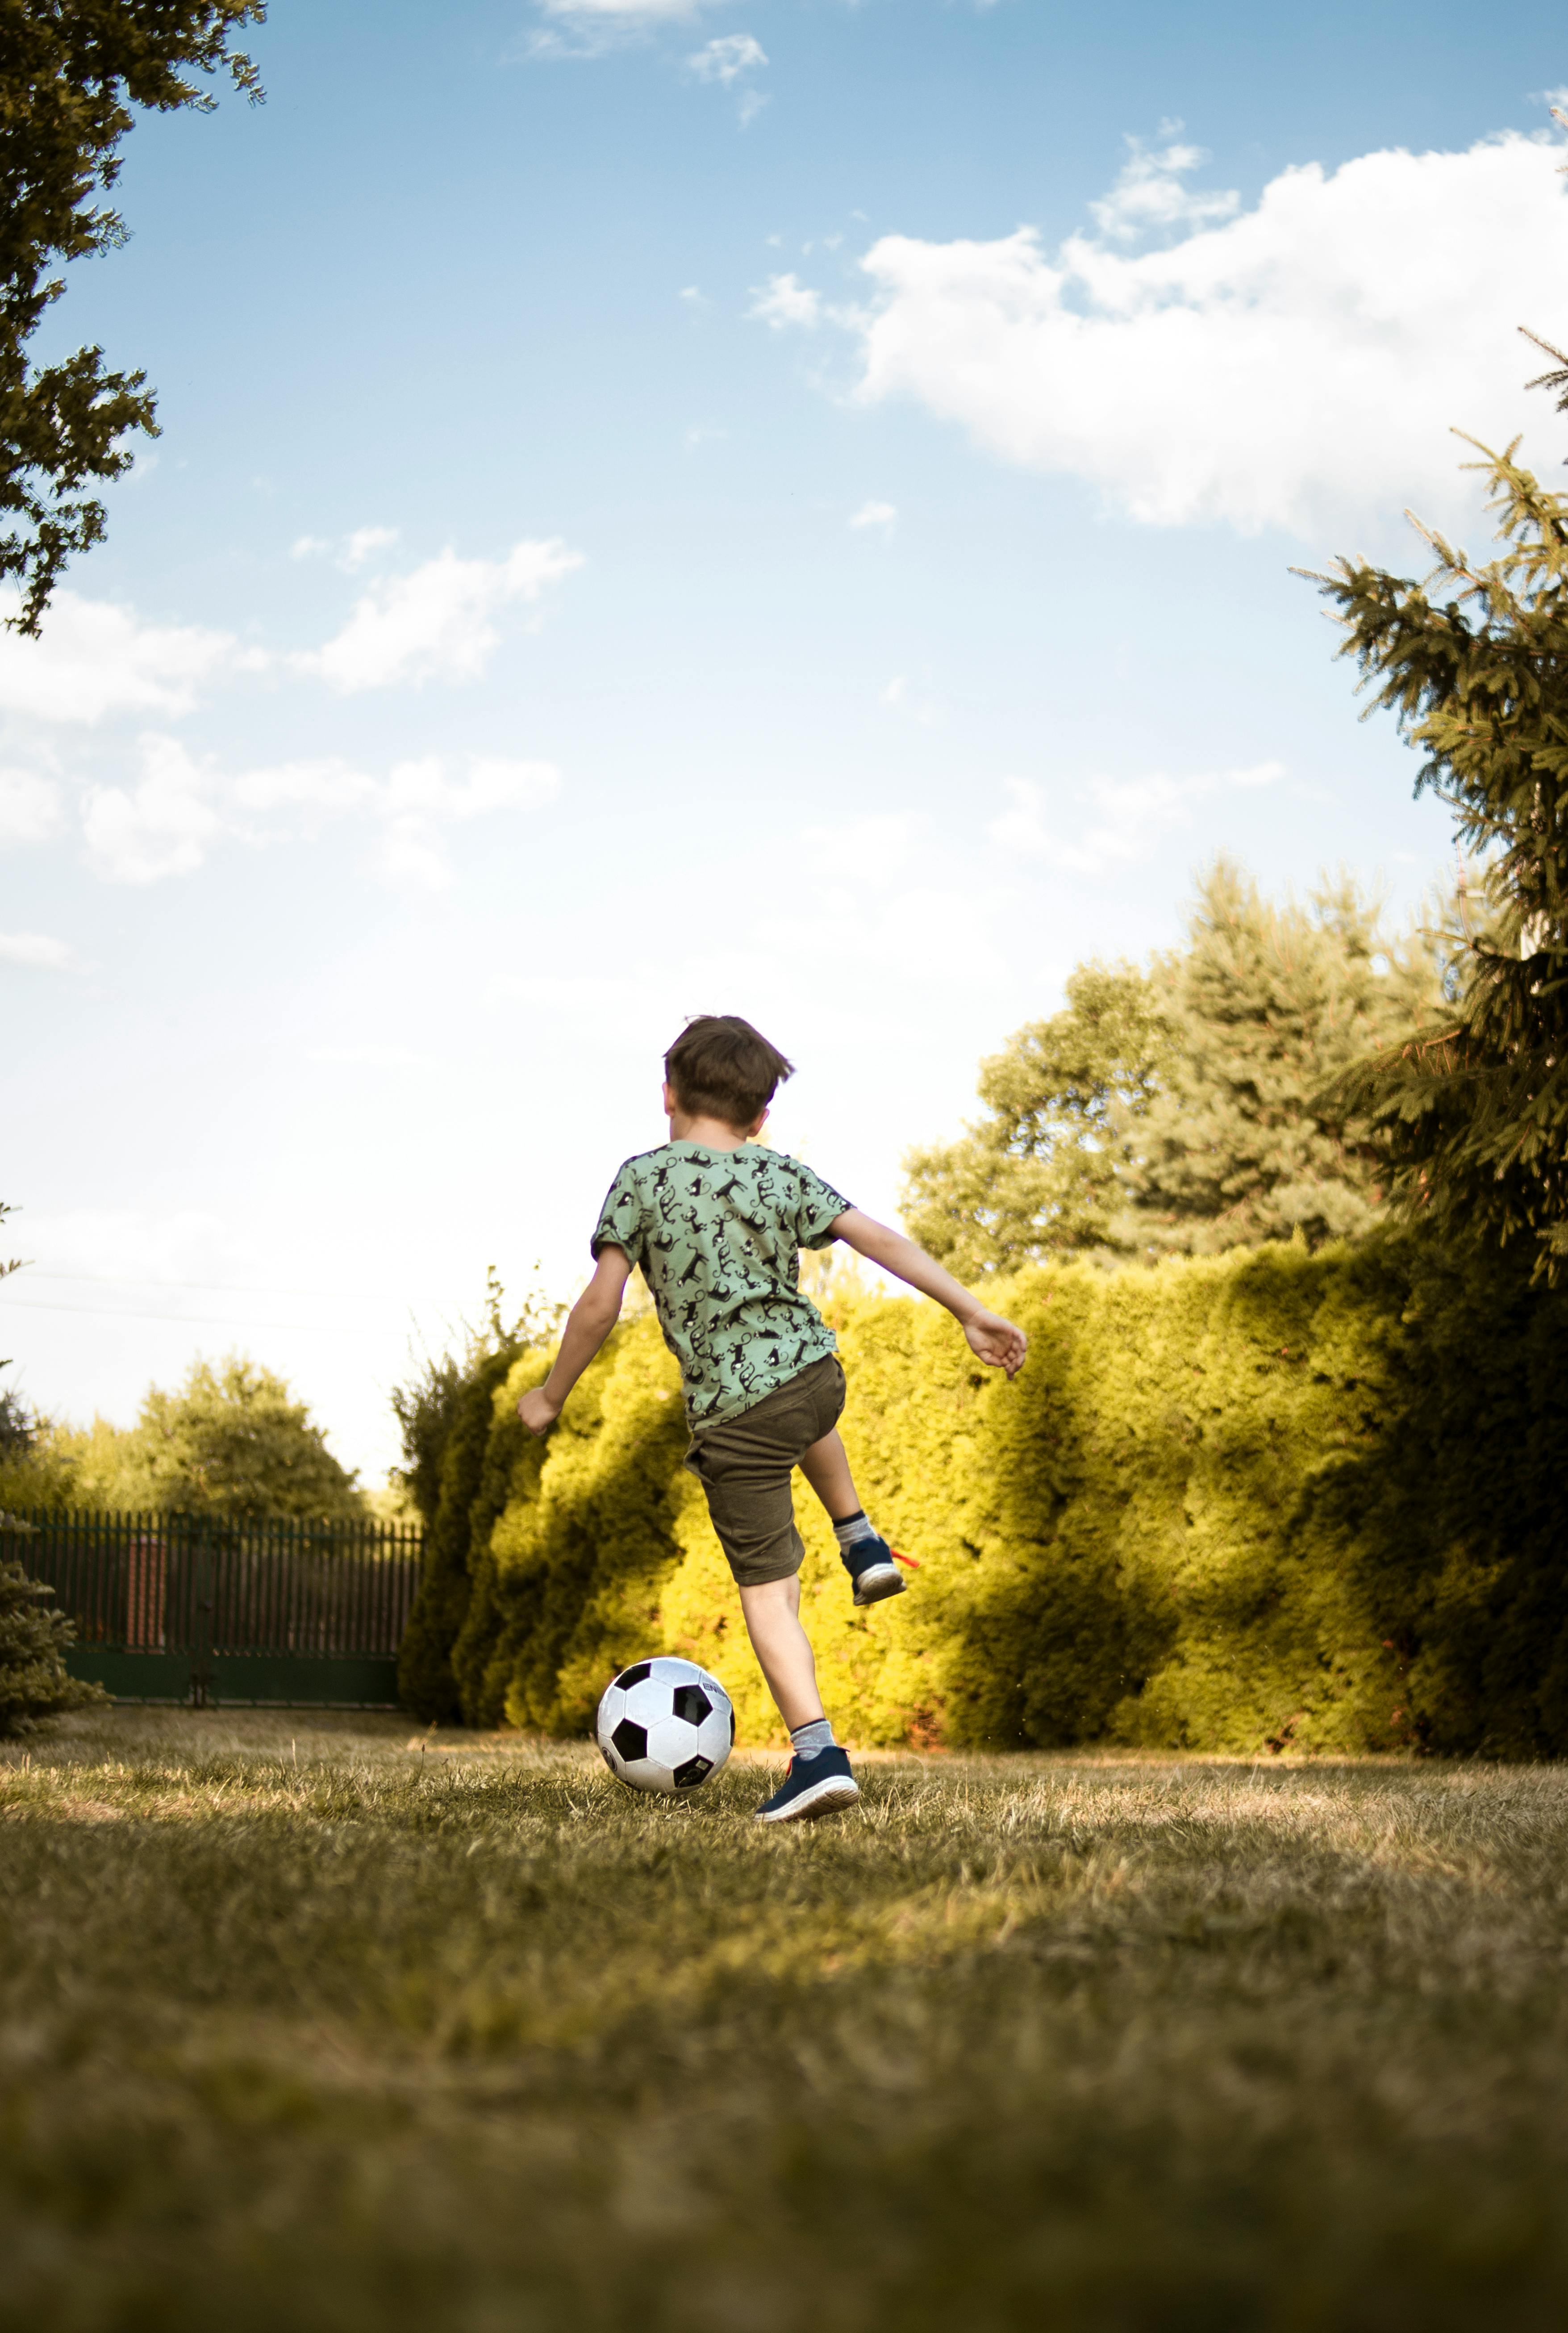 A boy playing with a soccer ball | Source: Pexels